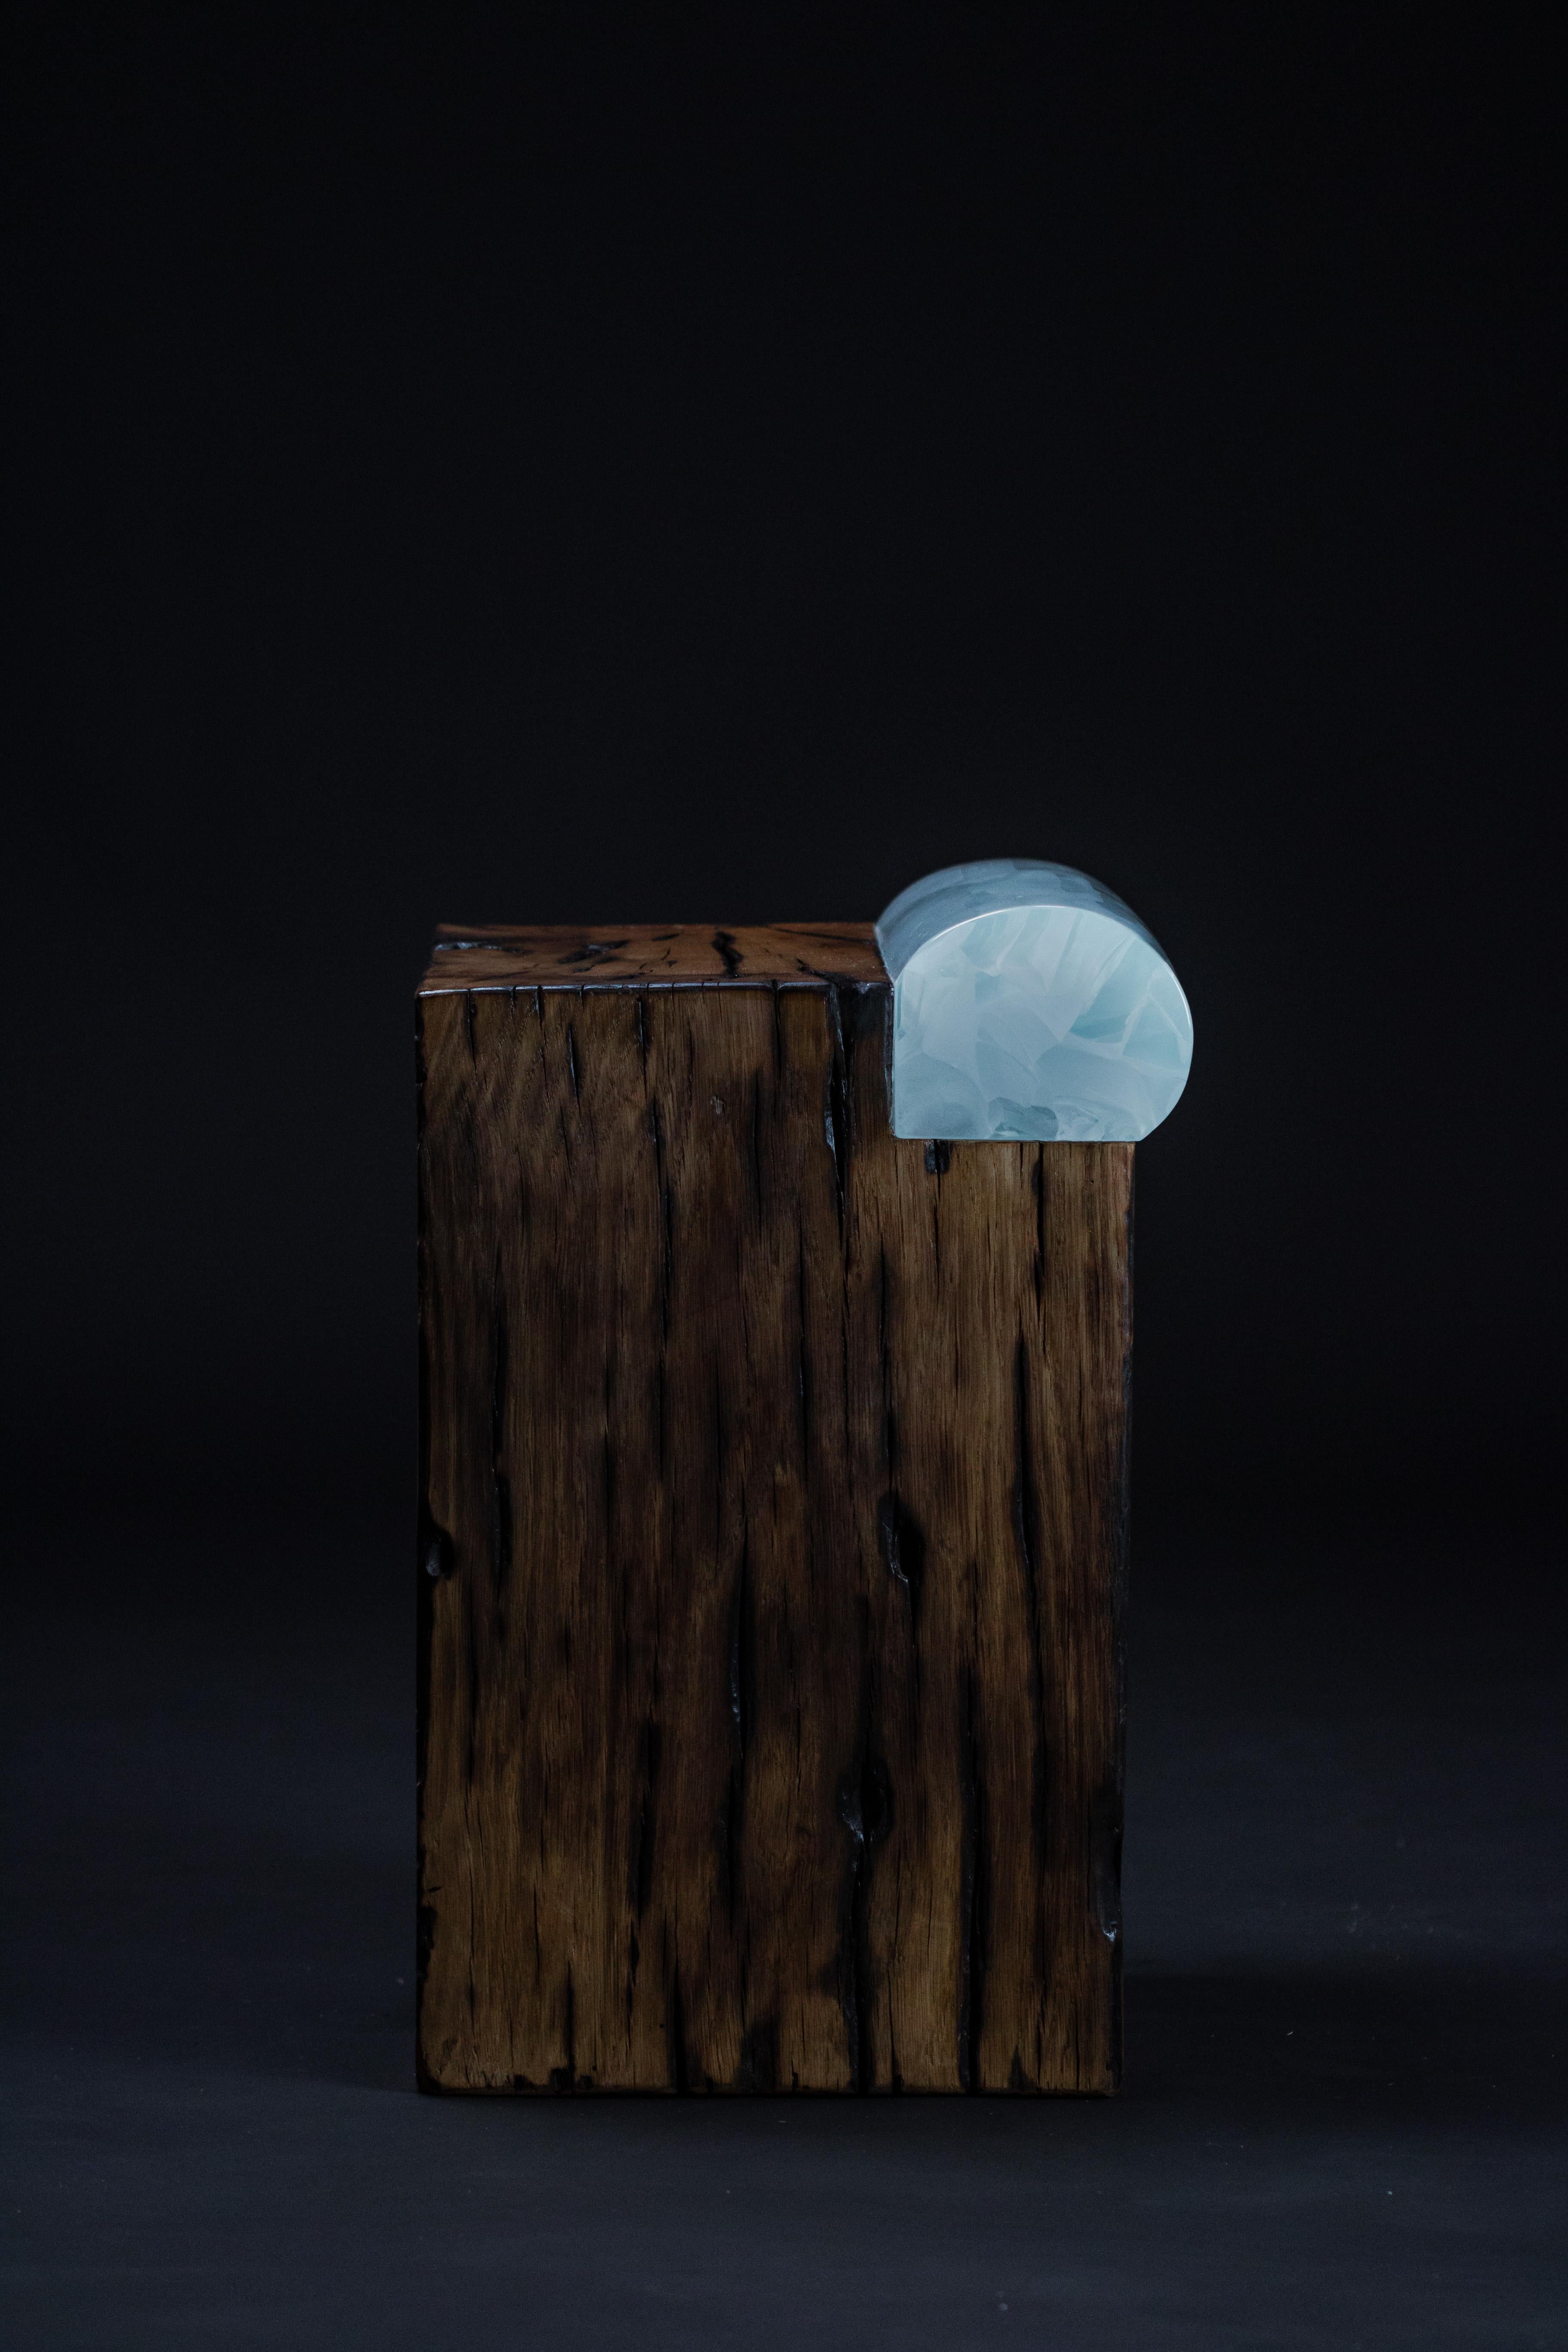 Symbiosis Side Table by Studio Nosqua
Dimensions: D 40 x W 55 x H 40 cm
Material: Glass, massive oak


The origins of Nosqua
Nosqua is glass designers collective who met at the National School of Glass. As the shared the same ambition, they decided